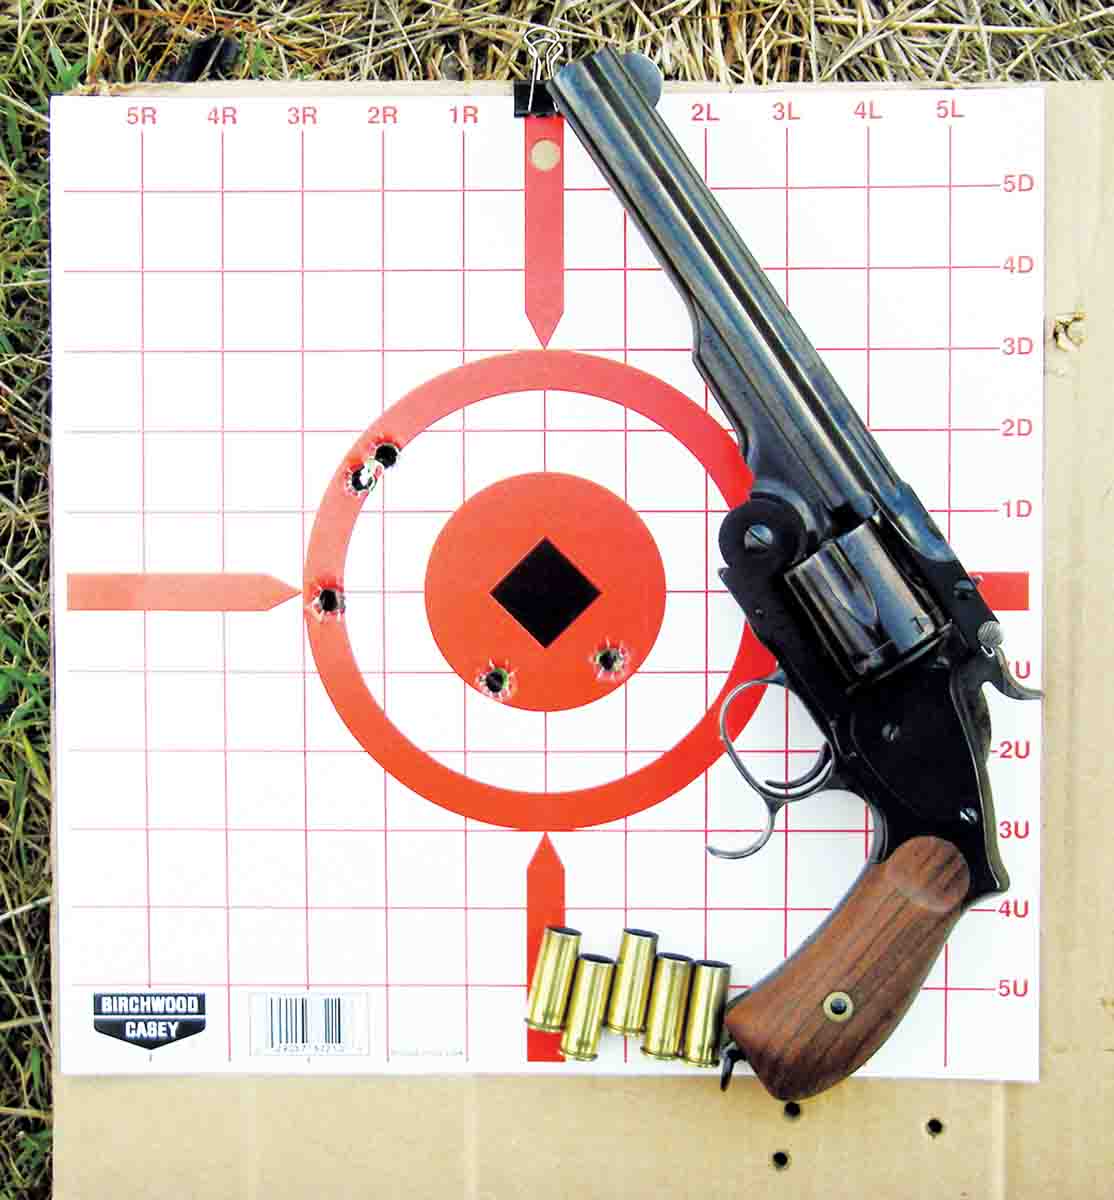 Most factory and handloads produced groups that hovered around 2½ to 4 inches at 25 yards.